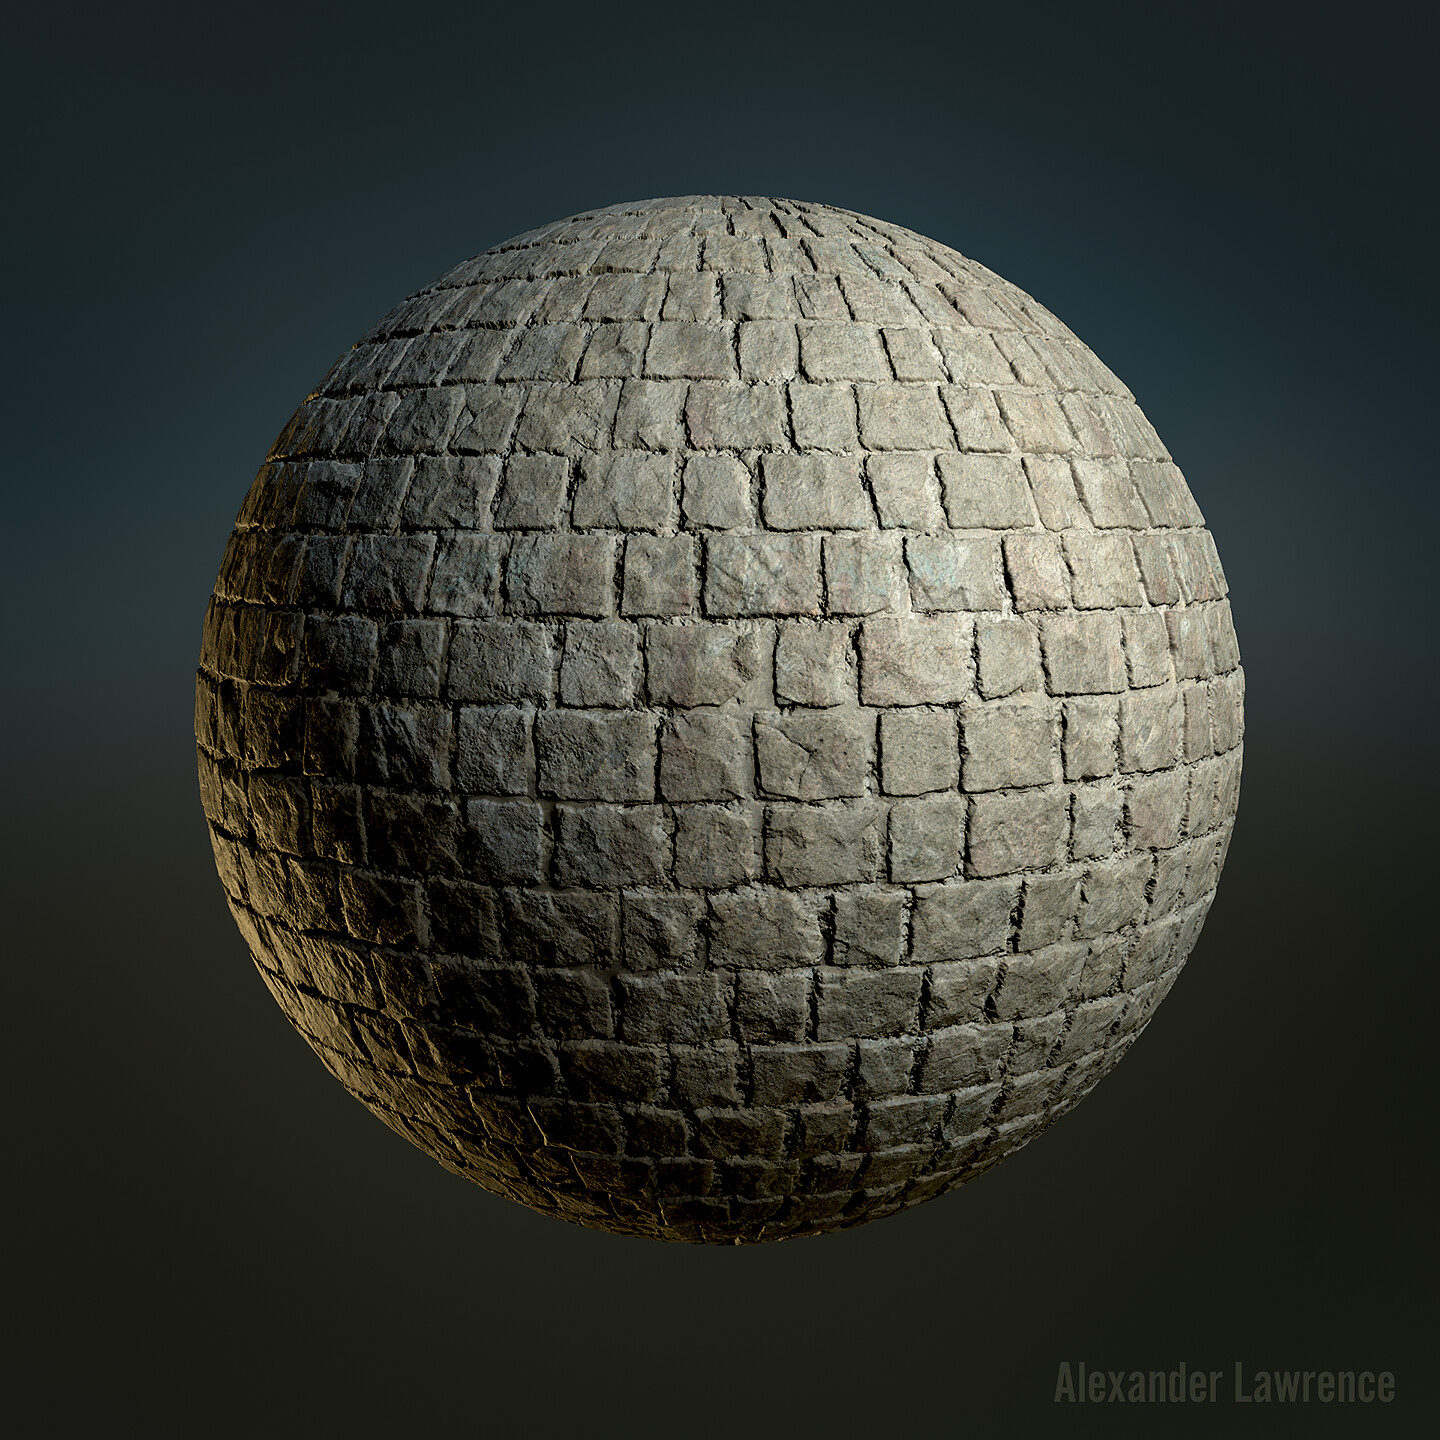 One of the primary wall materials. The albedo is intentionally left somewhat bland and uniform so that I can multiply grunge over it in the Unreal material editor. Heightmap generated in Zbrush.